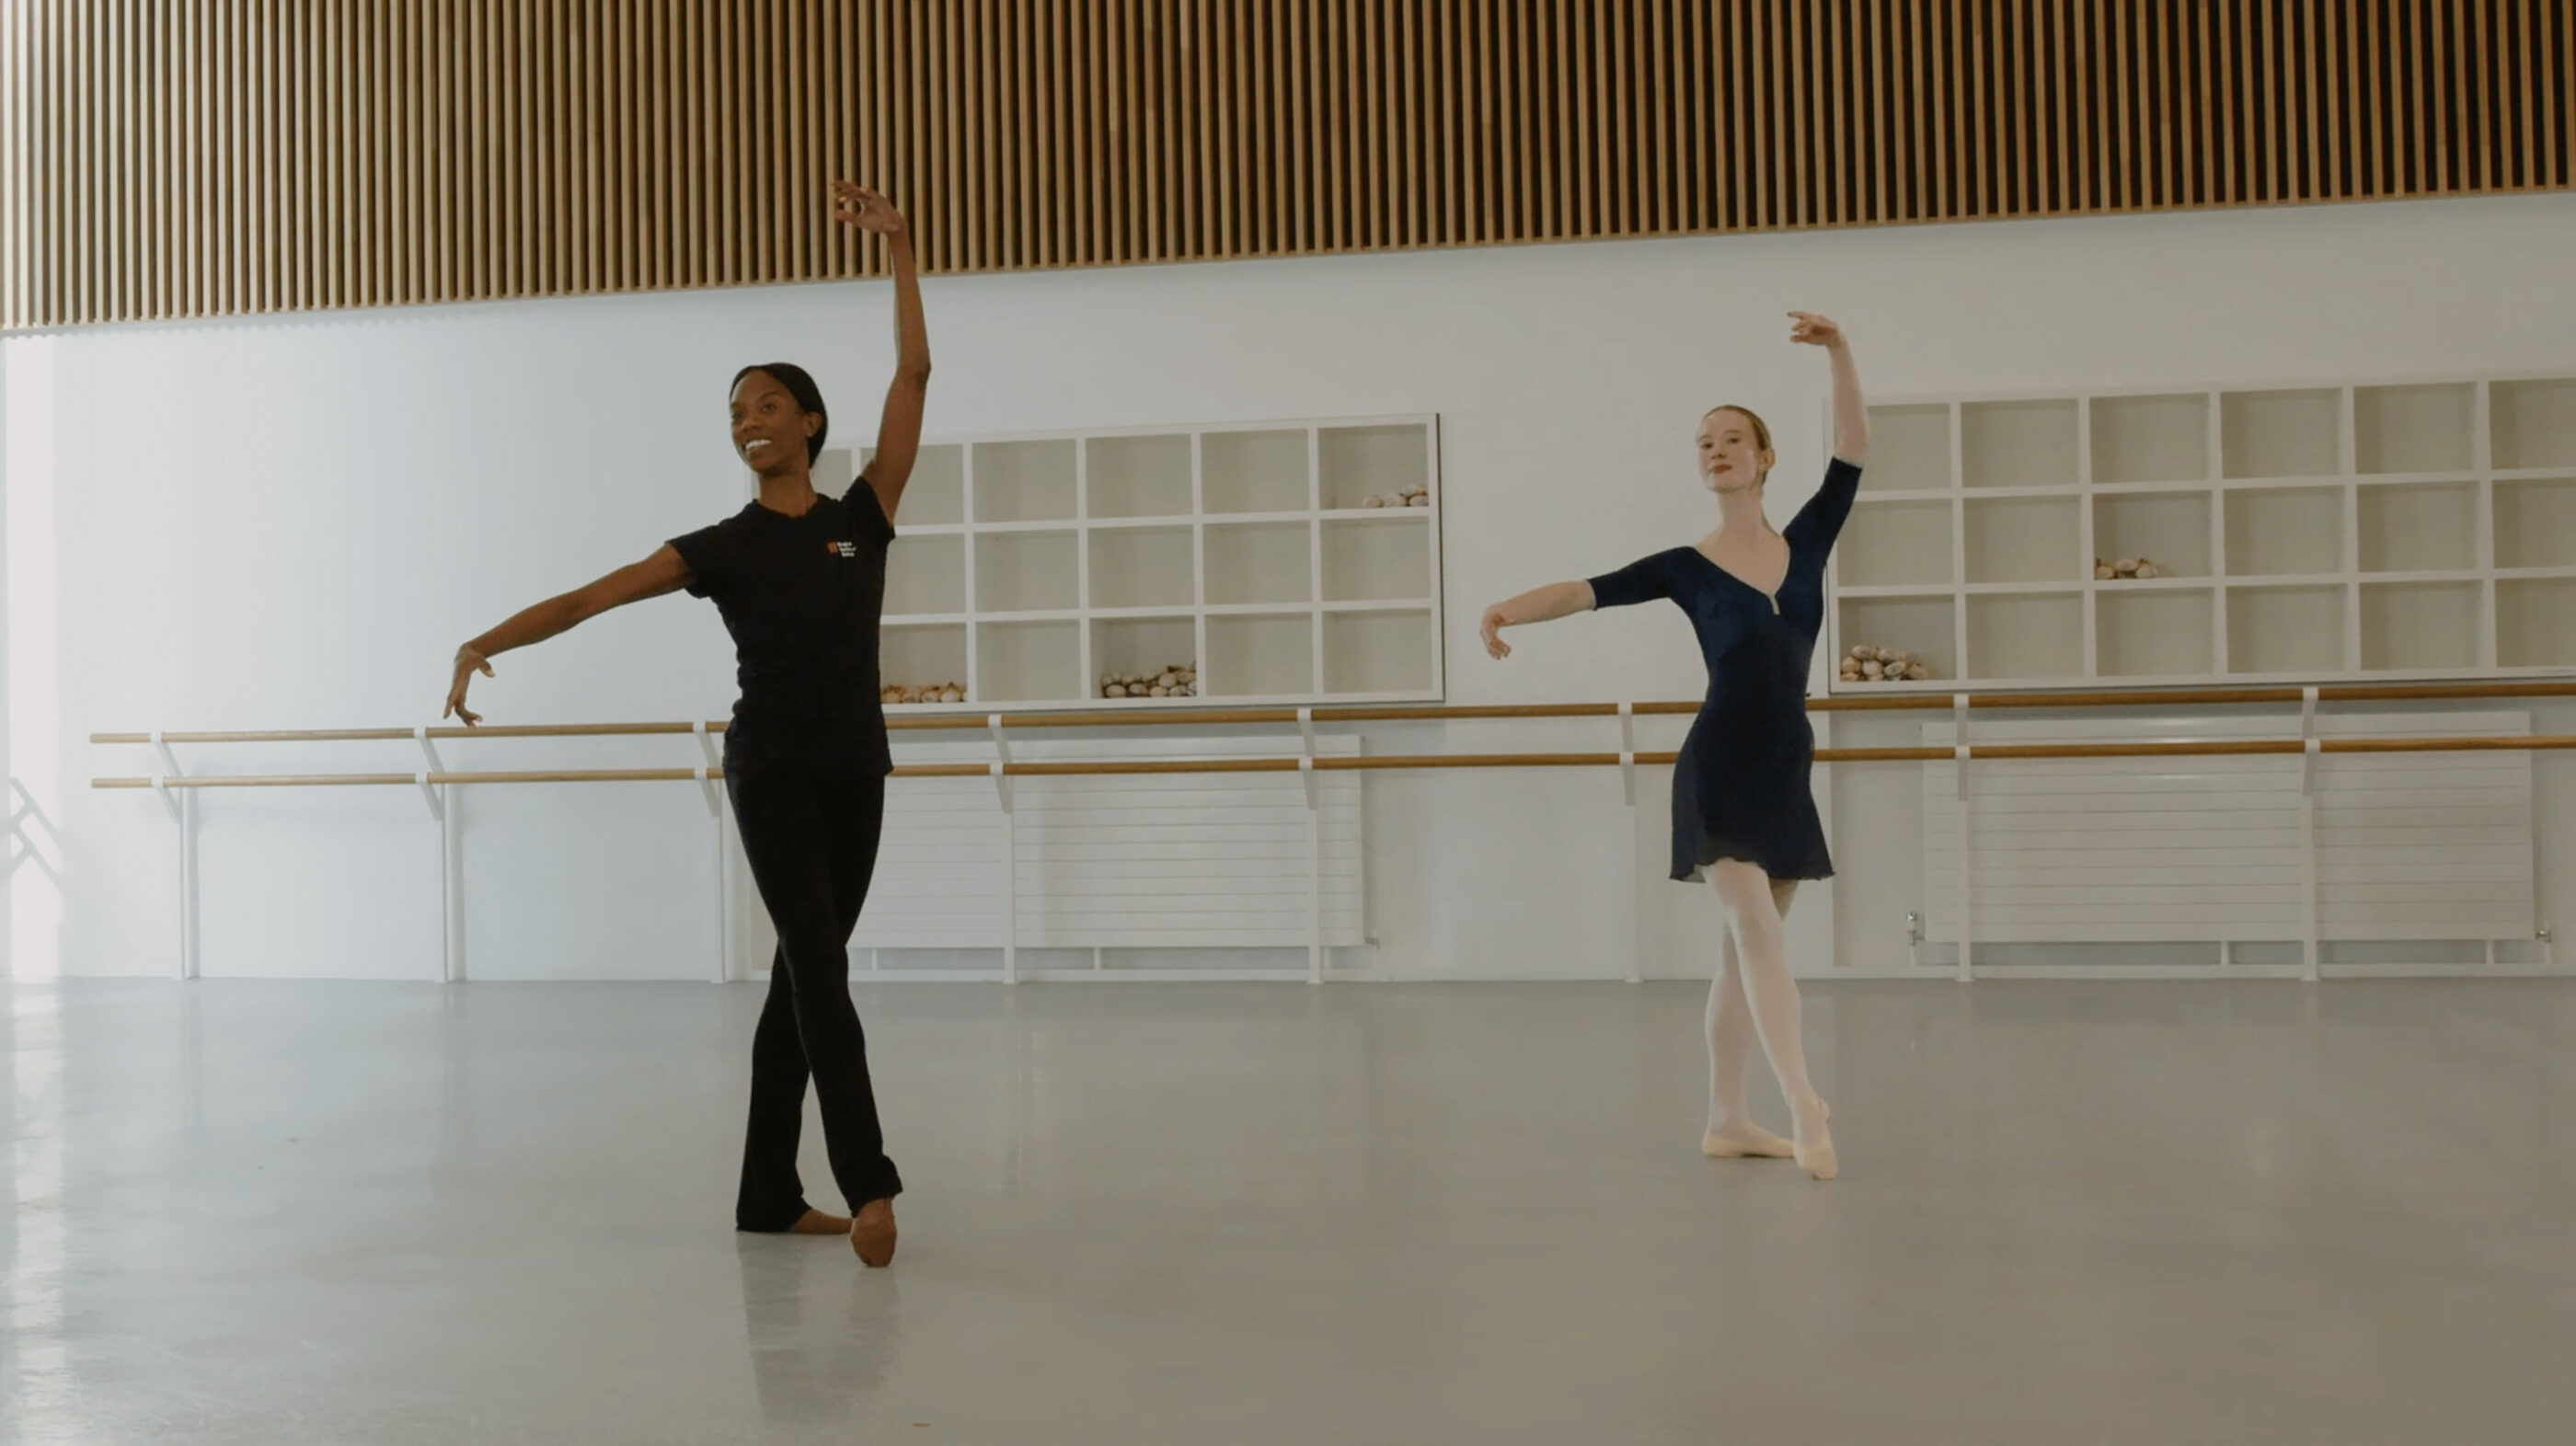 A ballet teacher and a ballet demonstrator are doing a battement tendu at the centre in a studio. The teacher is wearing a black outfit, the demonstrator is wearing a blue leotard and skirt.